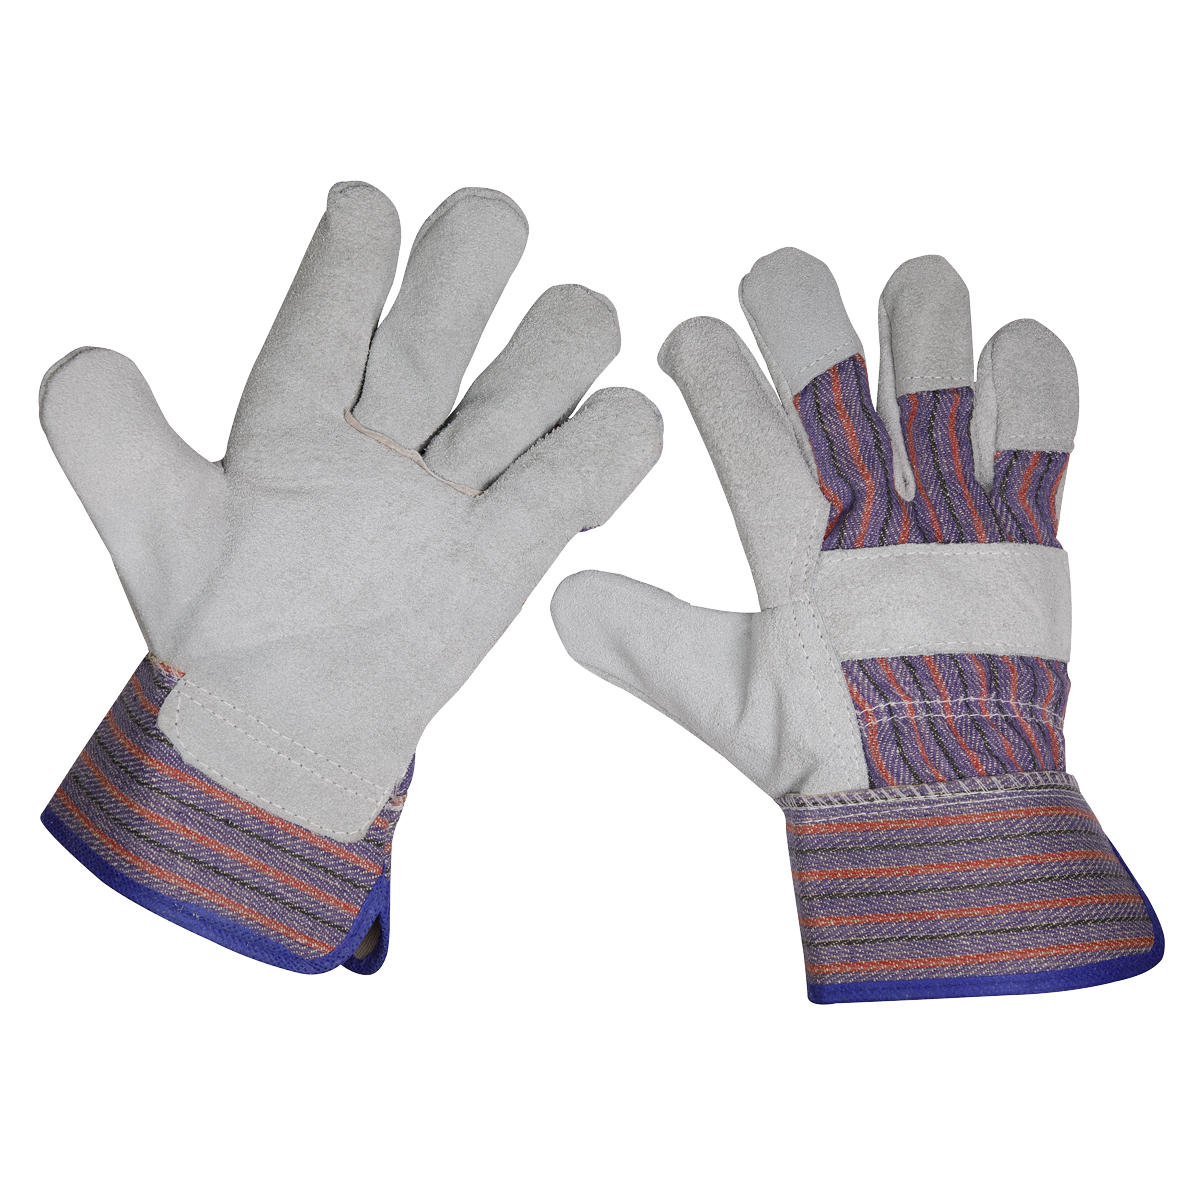 Rigger's Gloves - Pack of 6 Pairs - SSP12/6 - Farming Parts